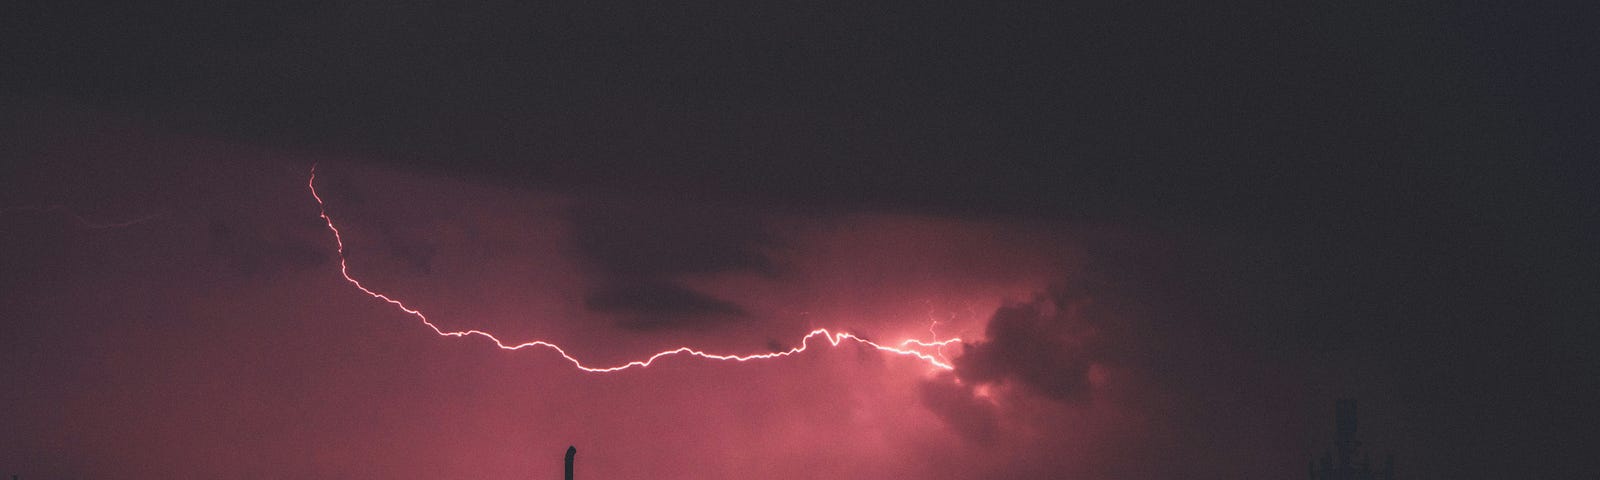 A red sky with lightning